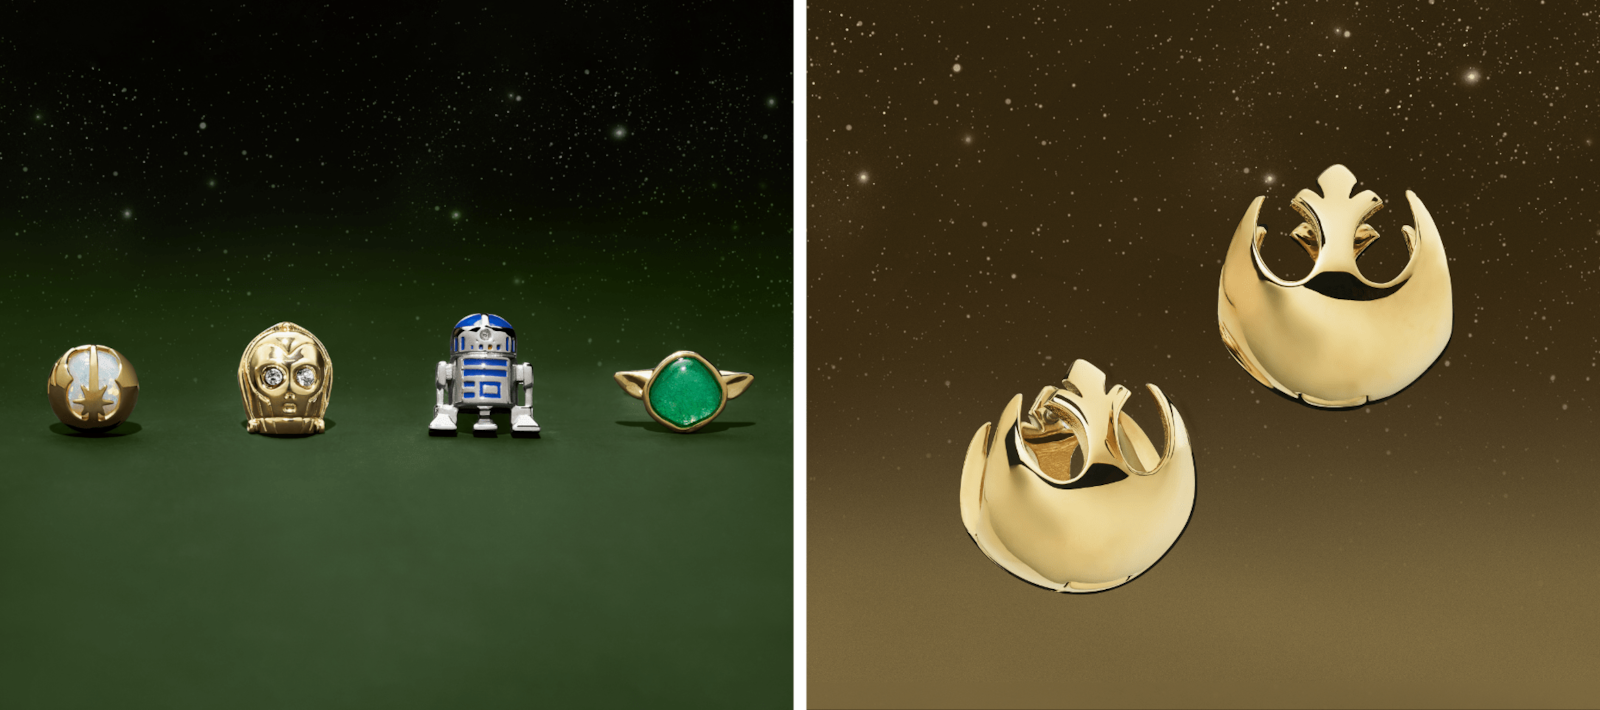 Stud earrings shaped like the symbol of the Rebellion, C-3PO, R2-D2 and Yoda. Gold-tone huggie earrings in the shape of the Rebellion symbol.